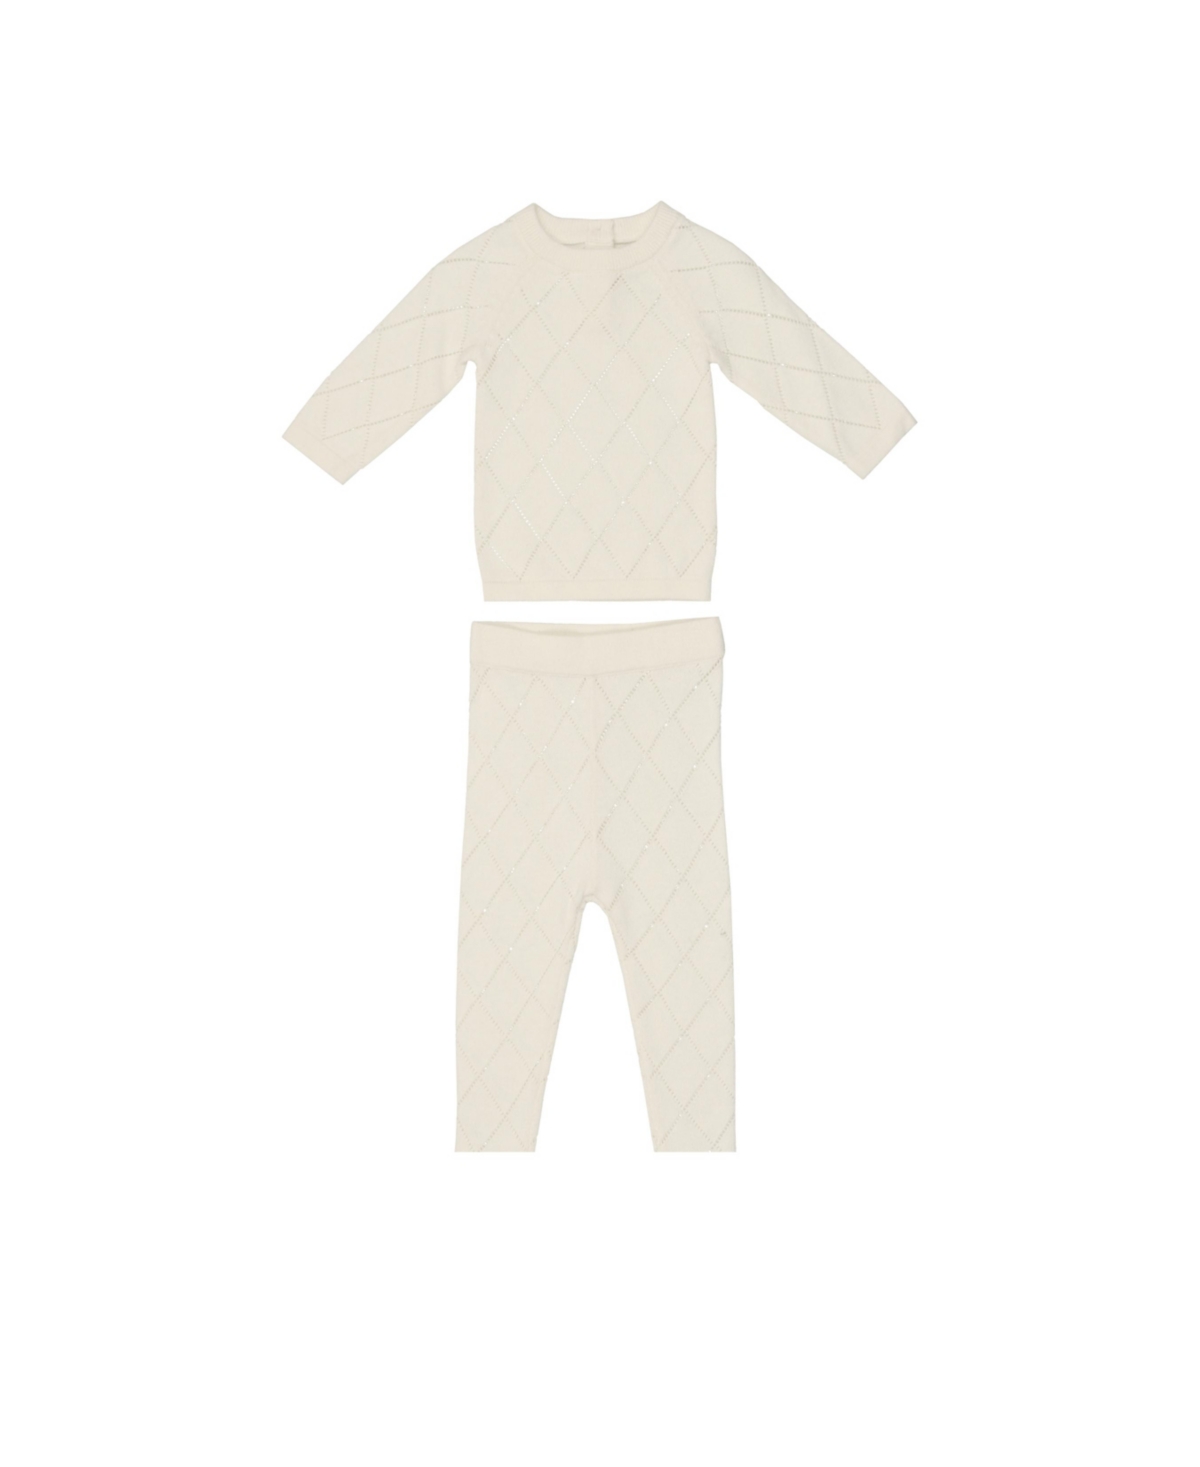 Maniere Maneire Girls' 2-pc. Diamond Pointelle Top & Pant Set - Baby, Little Kid In Ivory